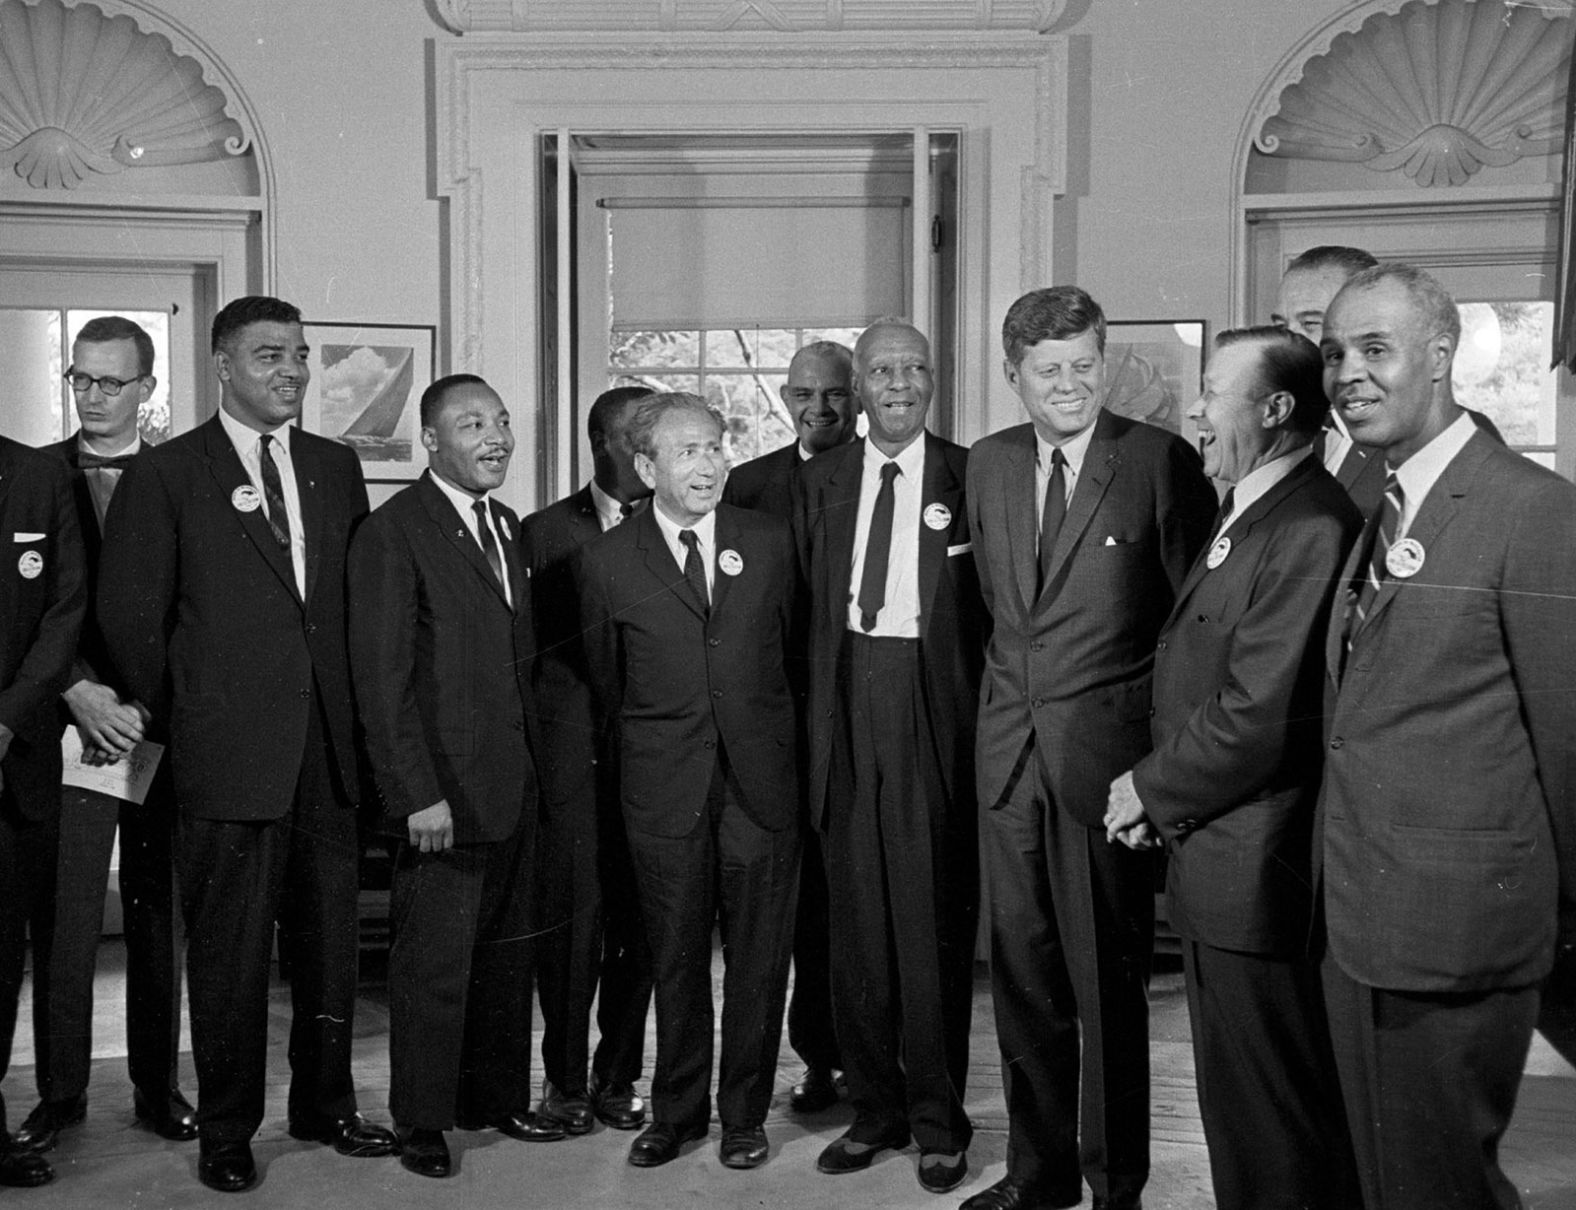 Kennedy meets with organizers of the March on Washington, including Martin Luther King Jr., at the White House in August 1963.